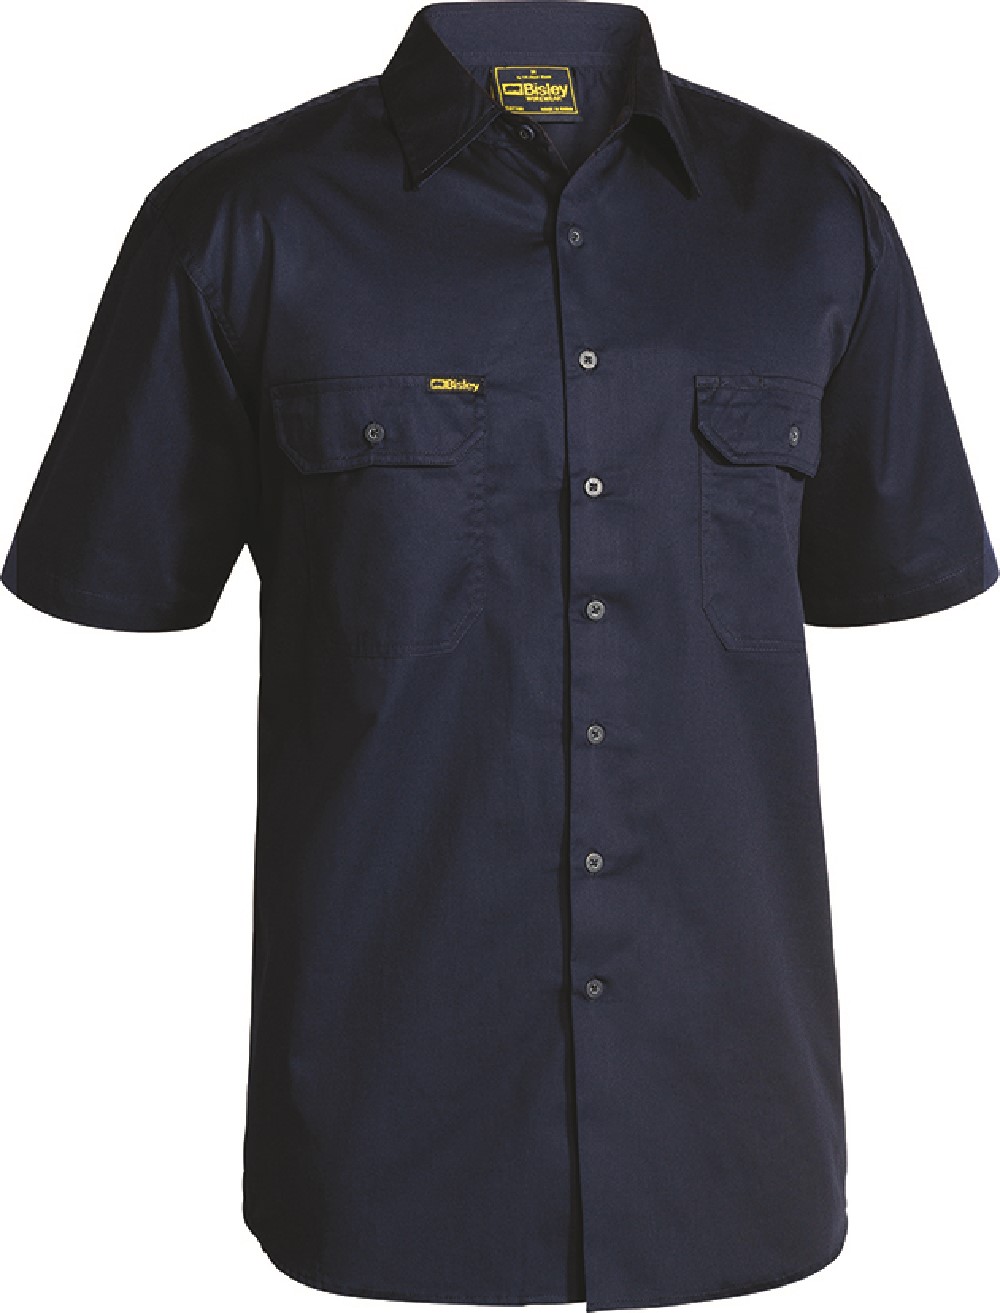 SHIRT S/S COOLWEIGHT NAVY SIZE 2XL 